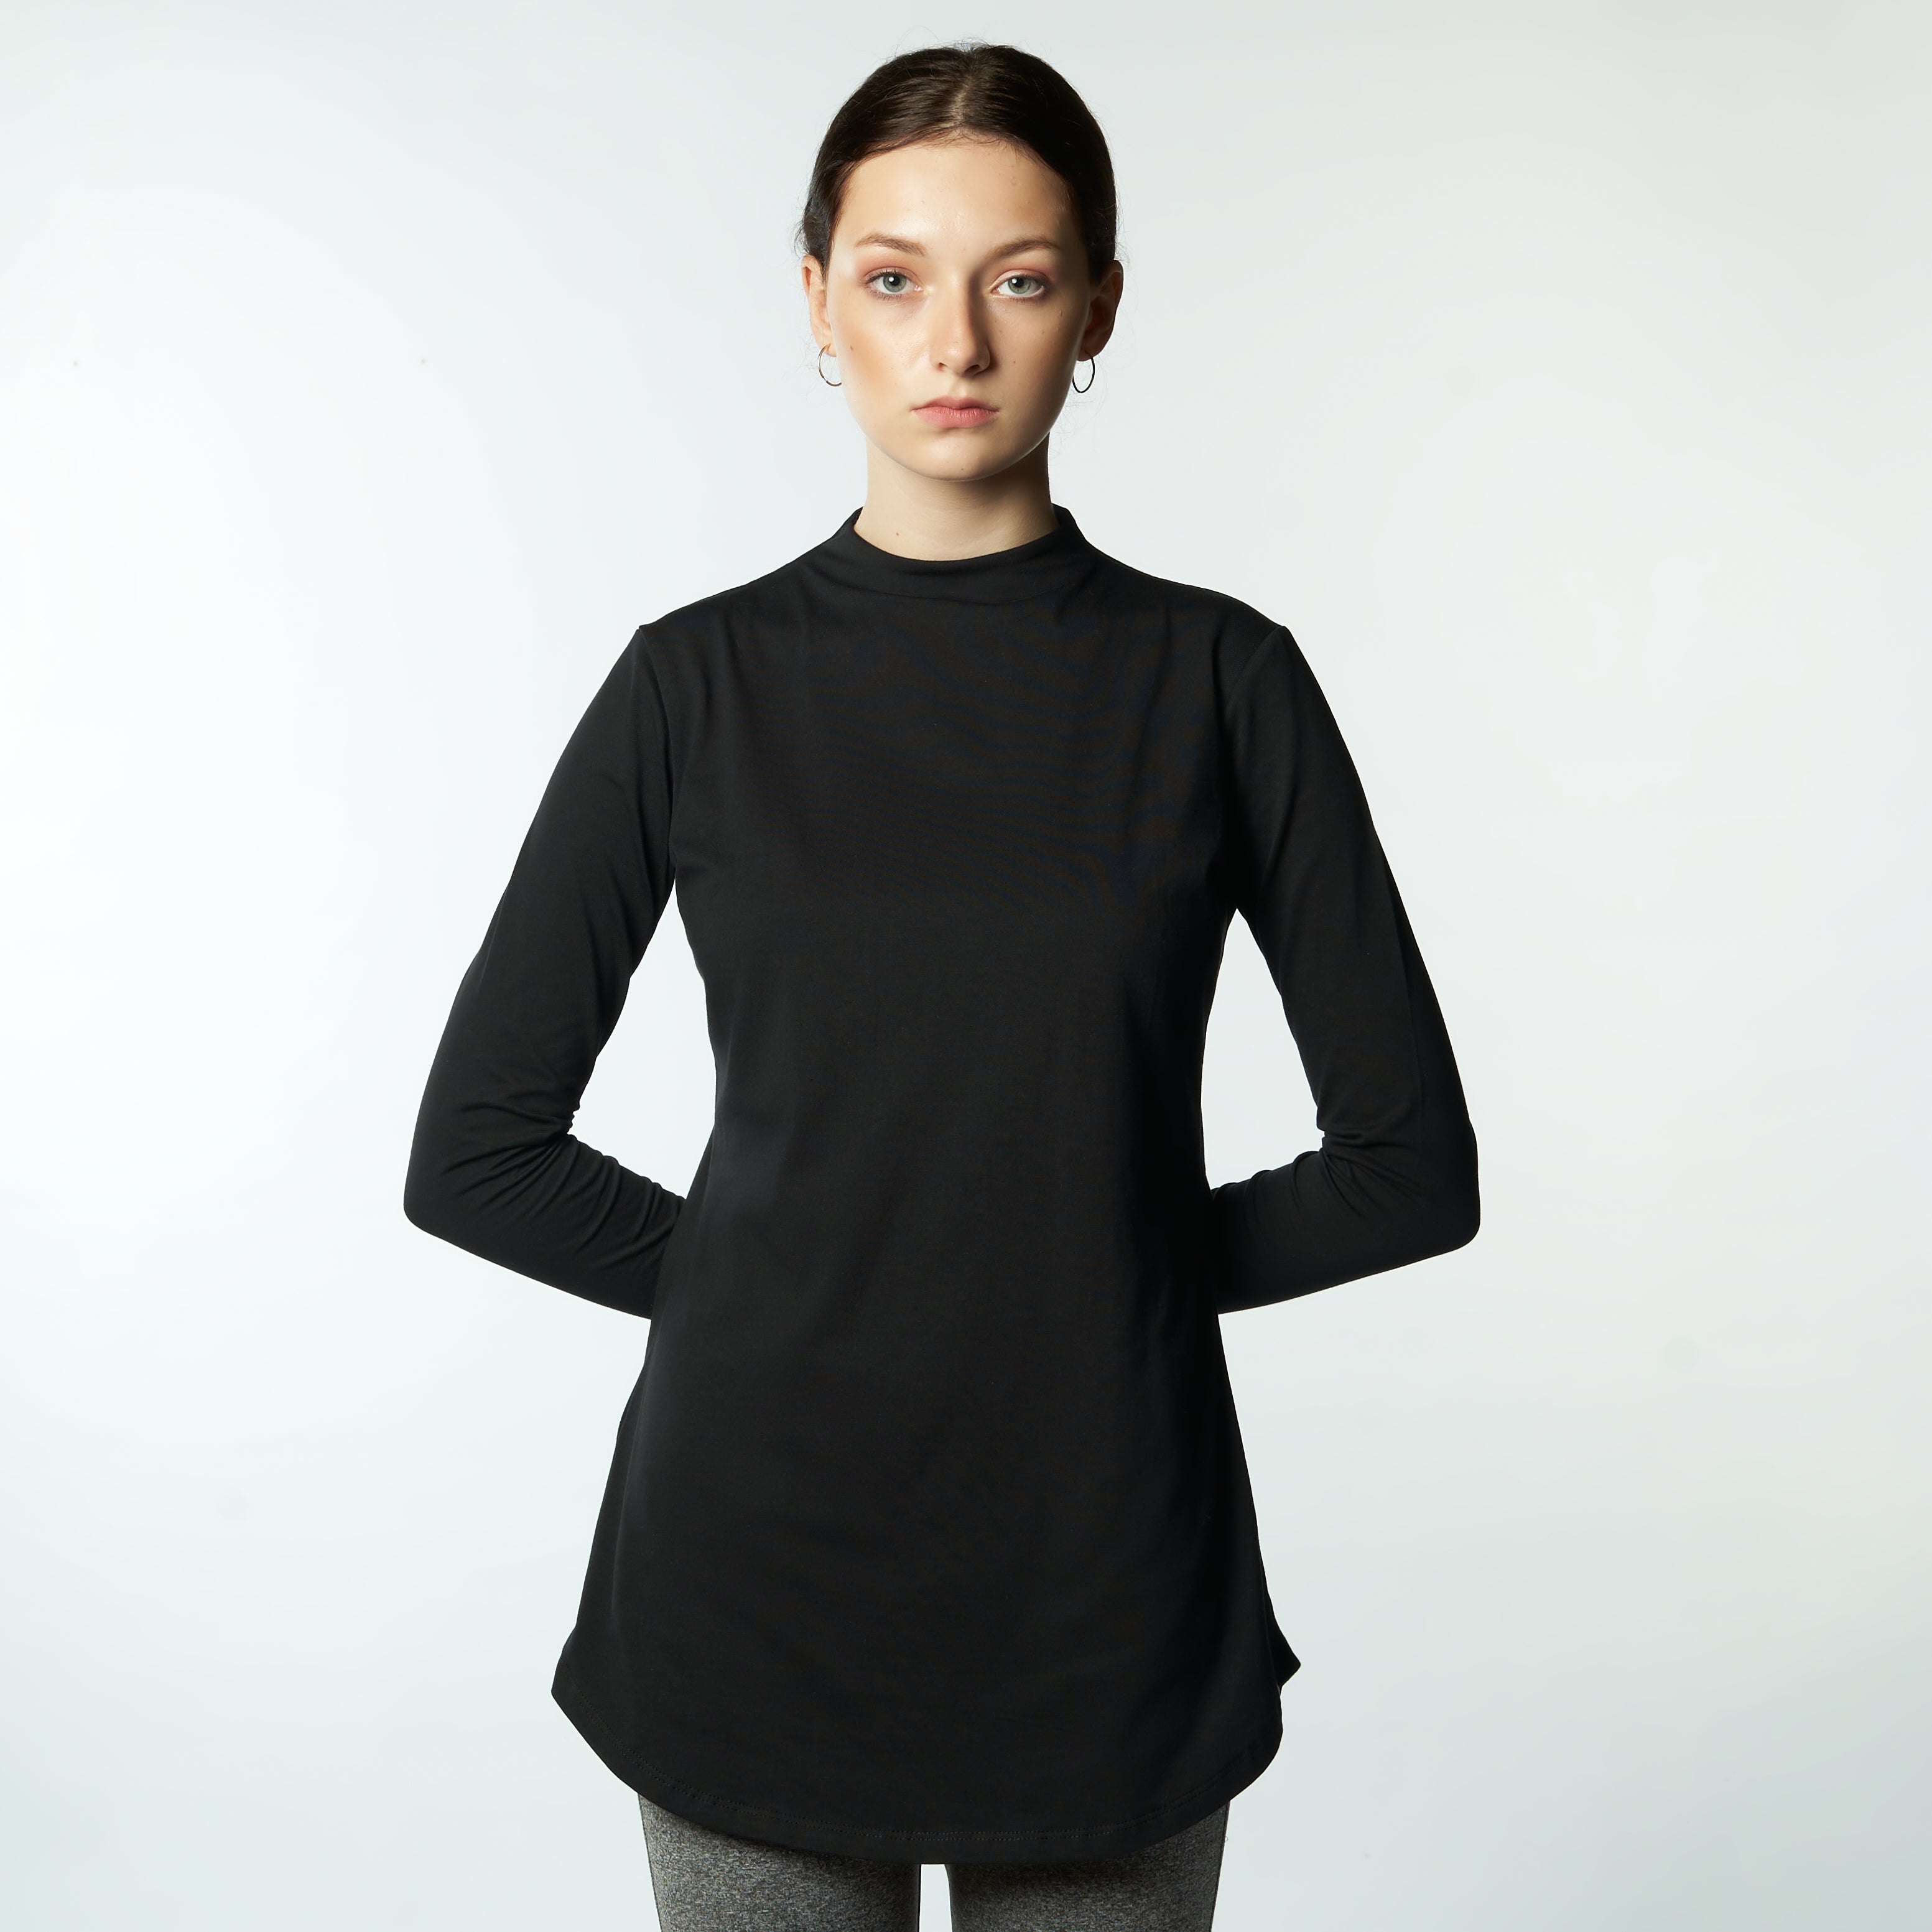 Bamboo + Premium Cotton Double Layer Long Fit Long Sleeves Basic T-Shirt